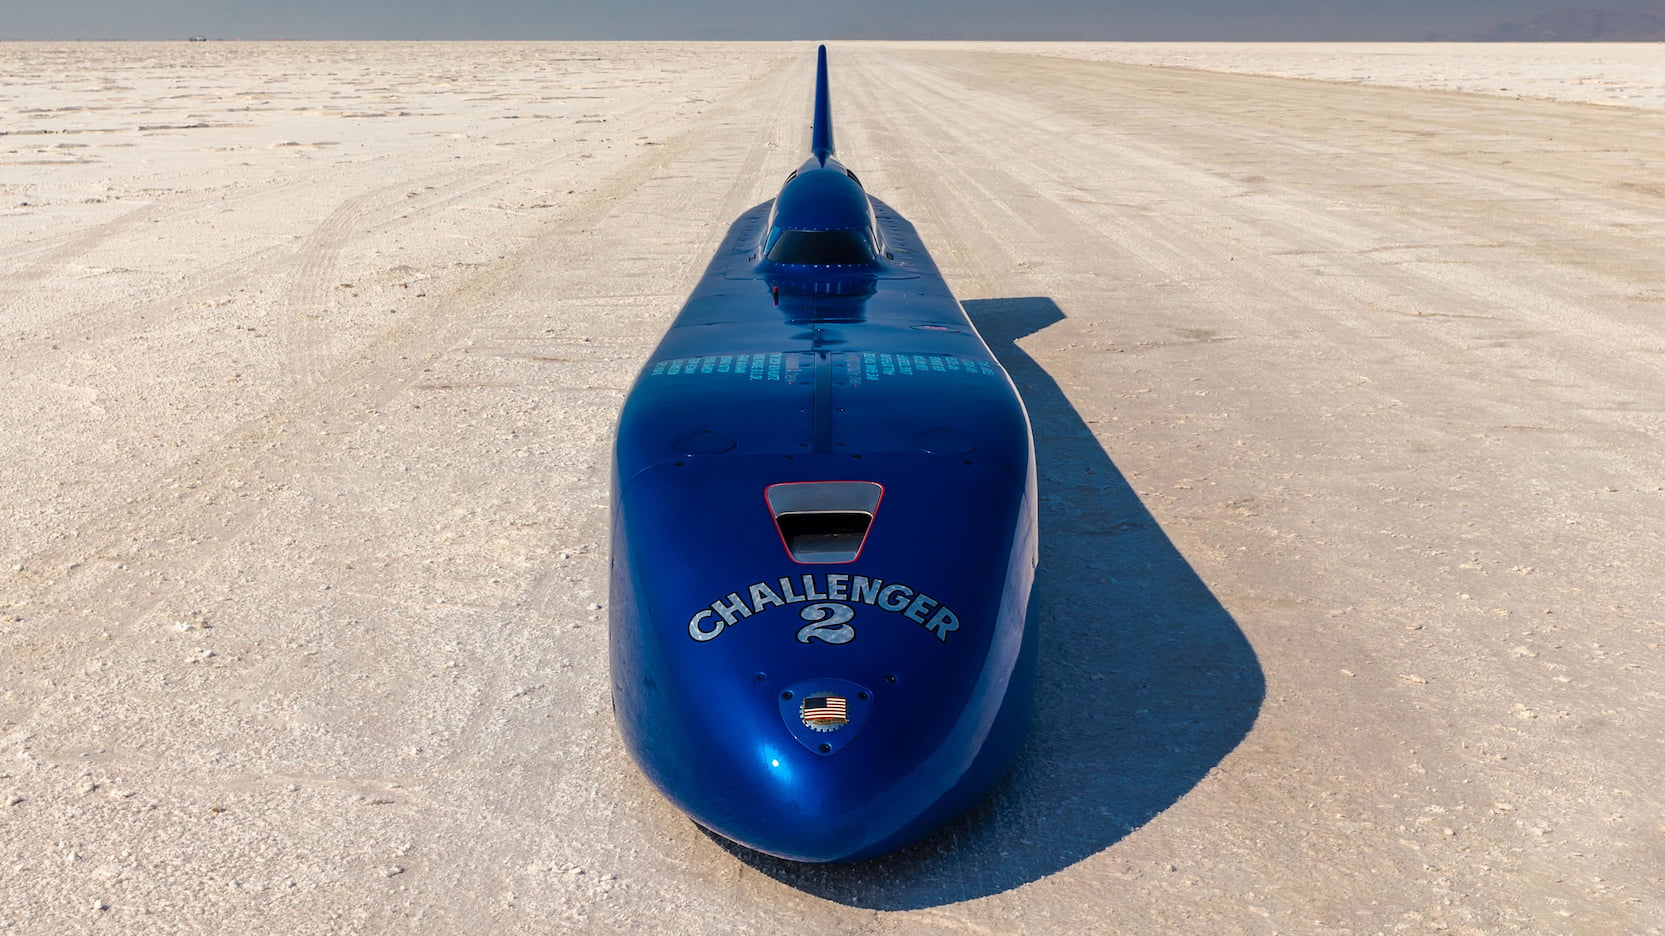 Challenger 2 speed record car